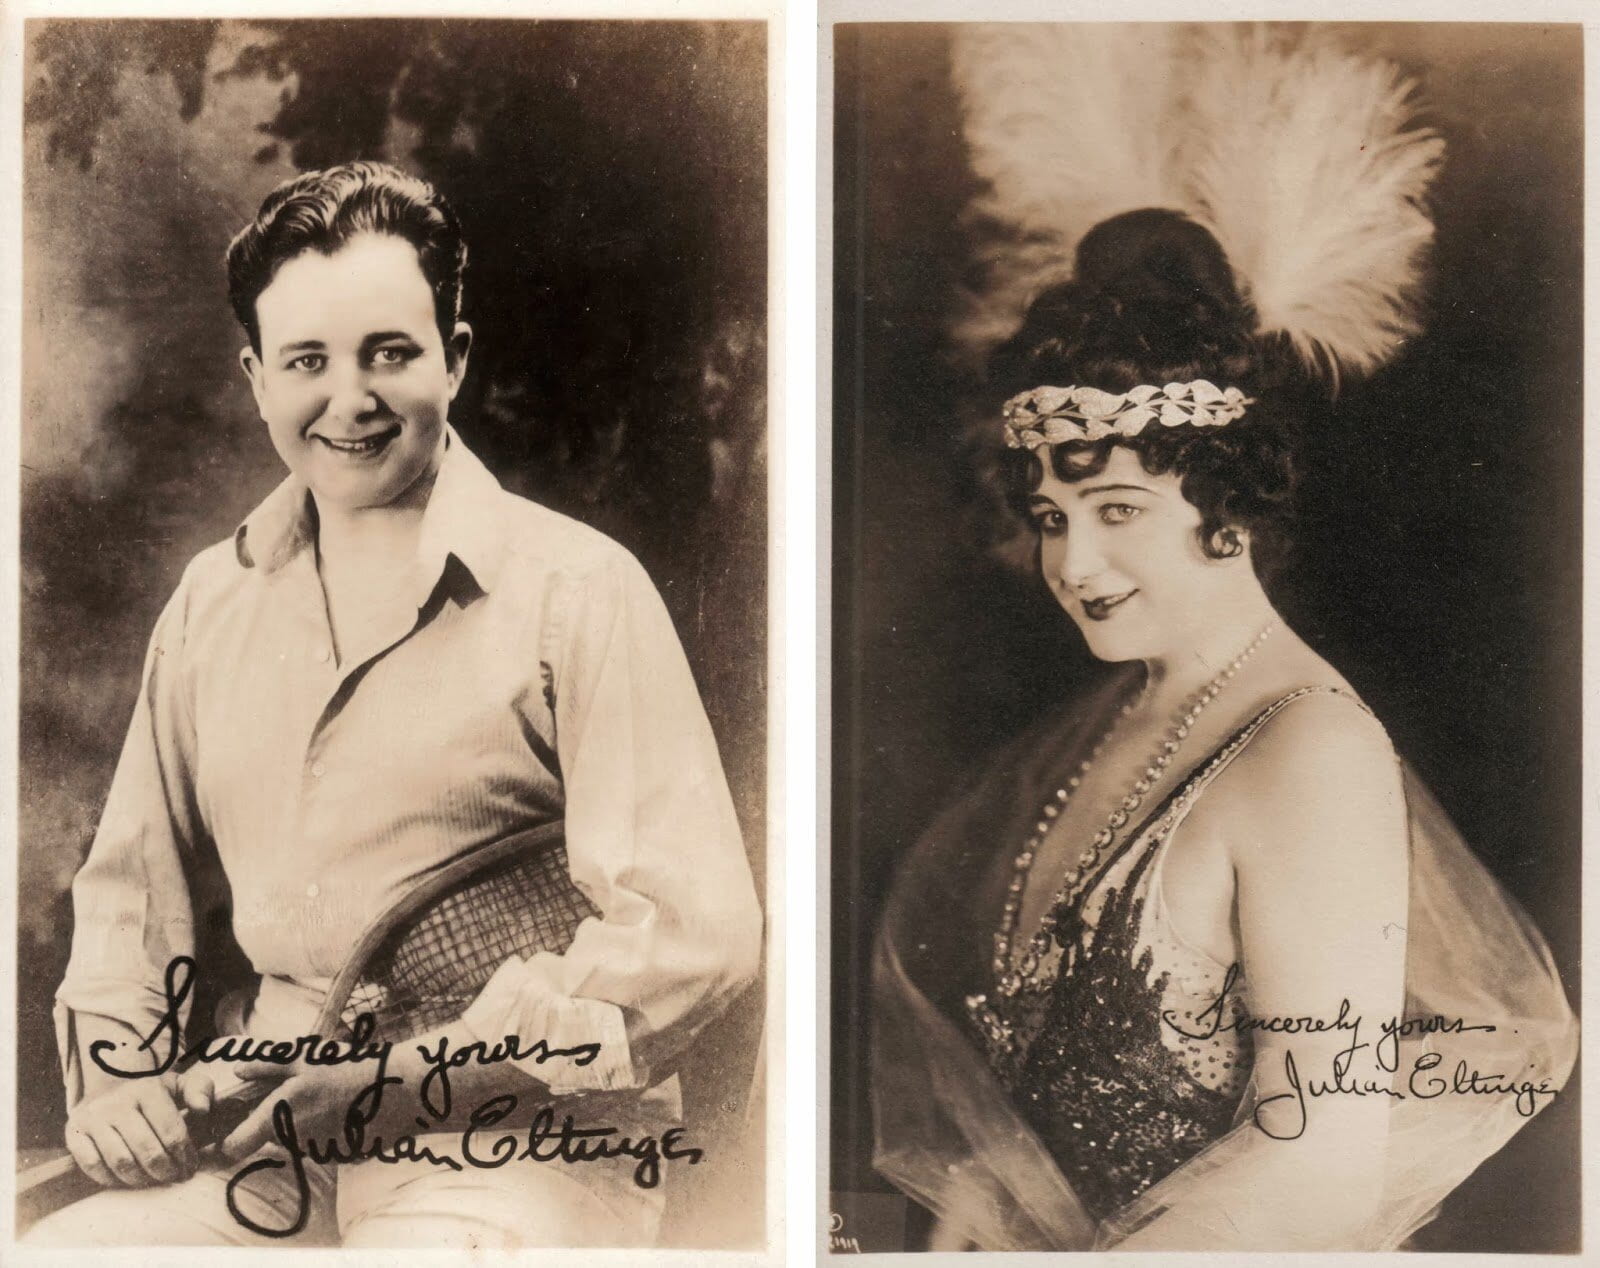 man on left of historical photo wearing button down. man in drag wearing dress and headpiece